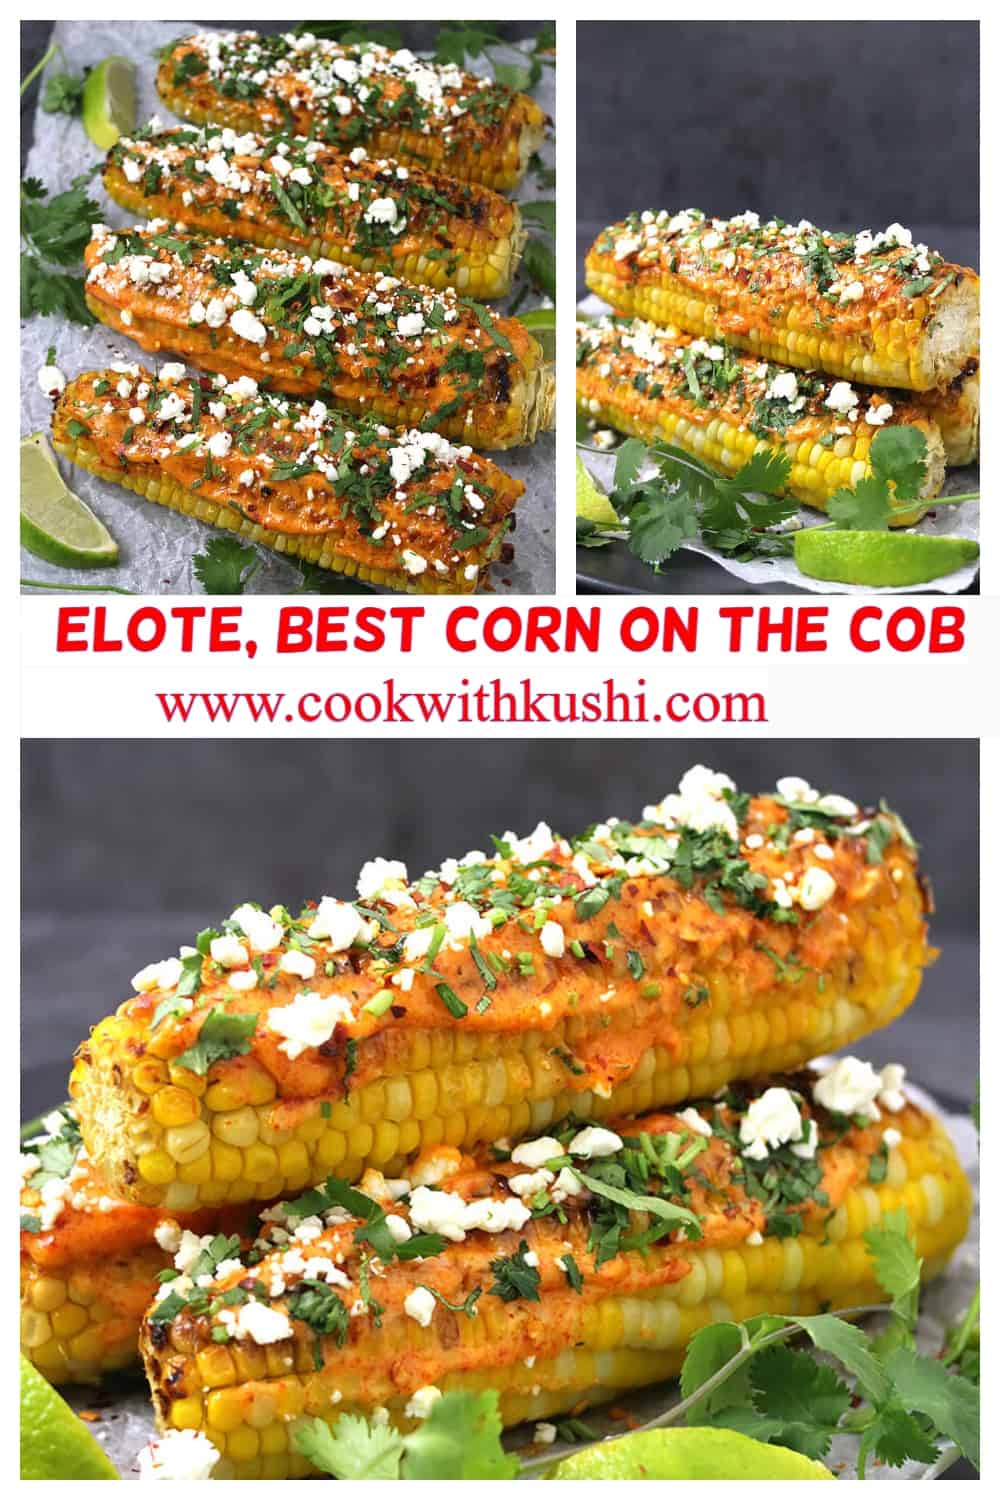 Mexican Corn on the Cob (Elote) with spicy mayo dressing, and garnished with finely chopped cilantro and crumbled cheese.